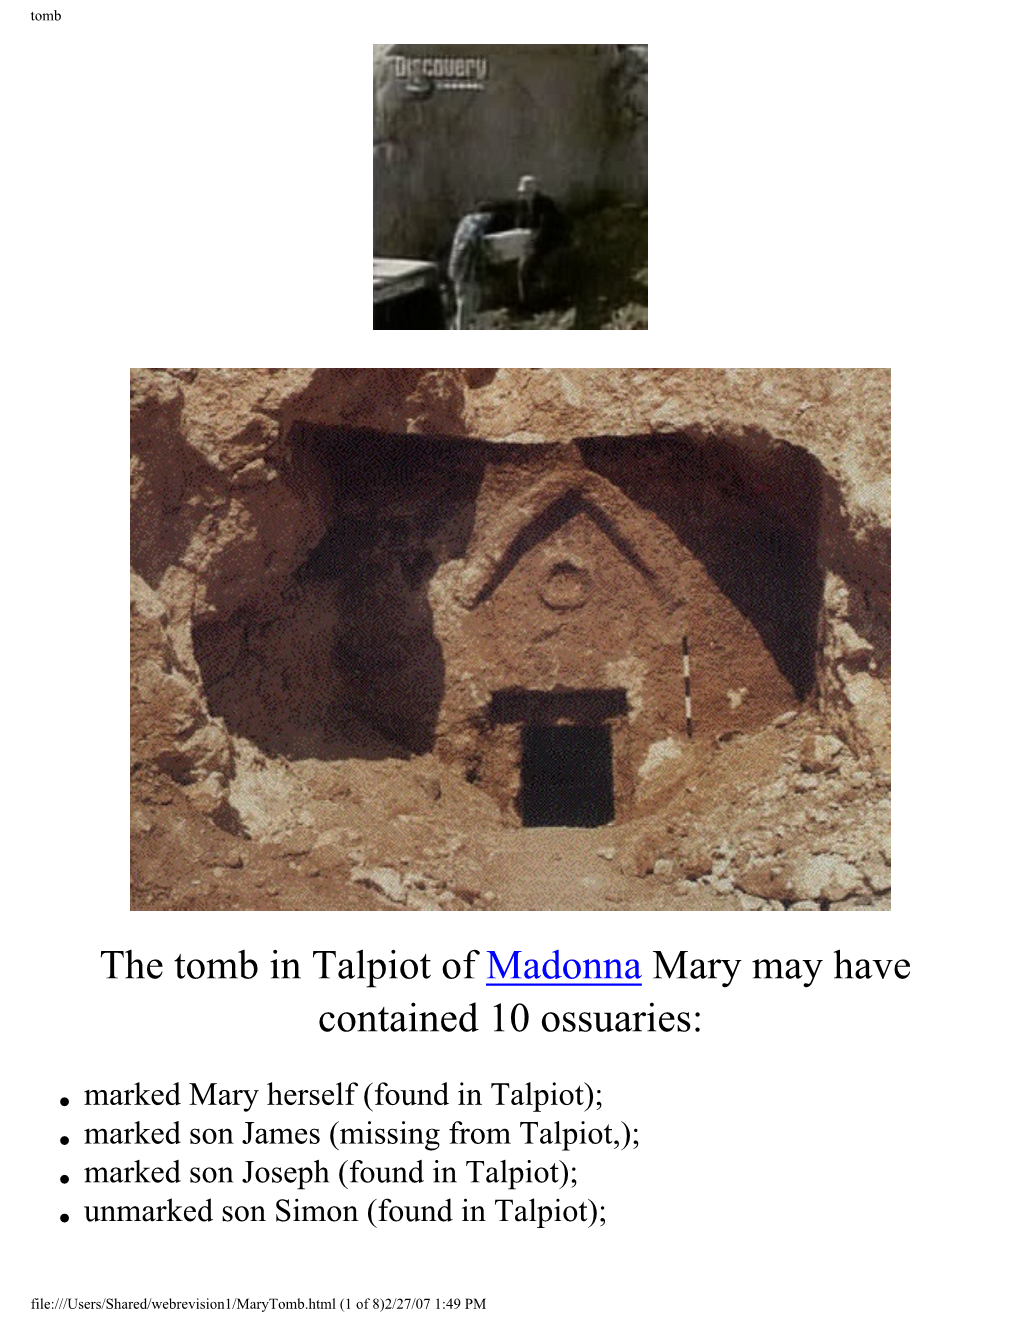 The Tomb in Talpiot of Madonna Mary May Have Contained 10 Ossuaries